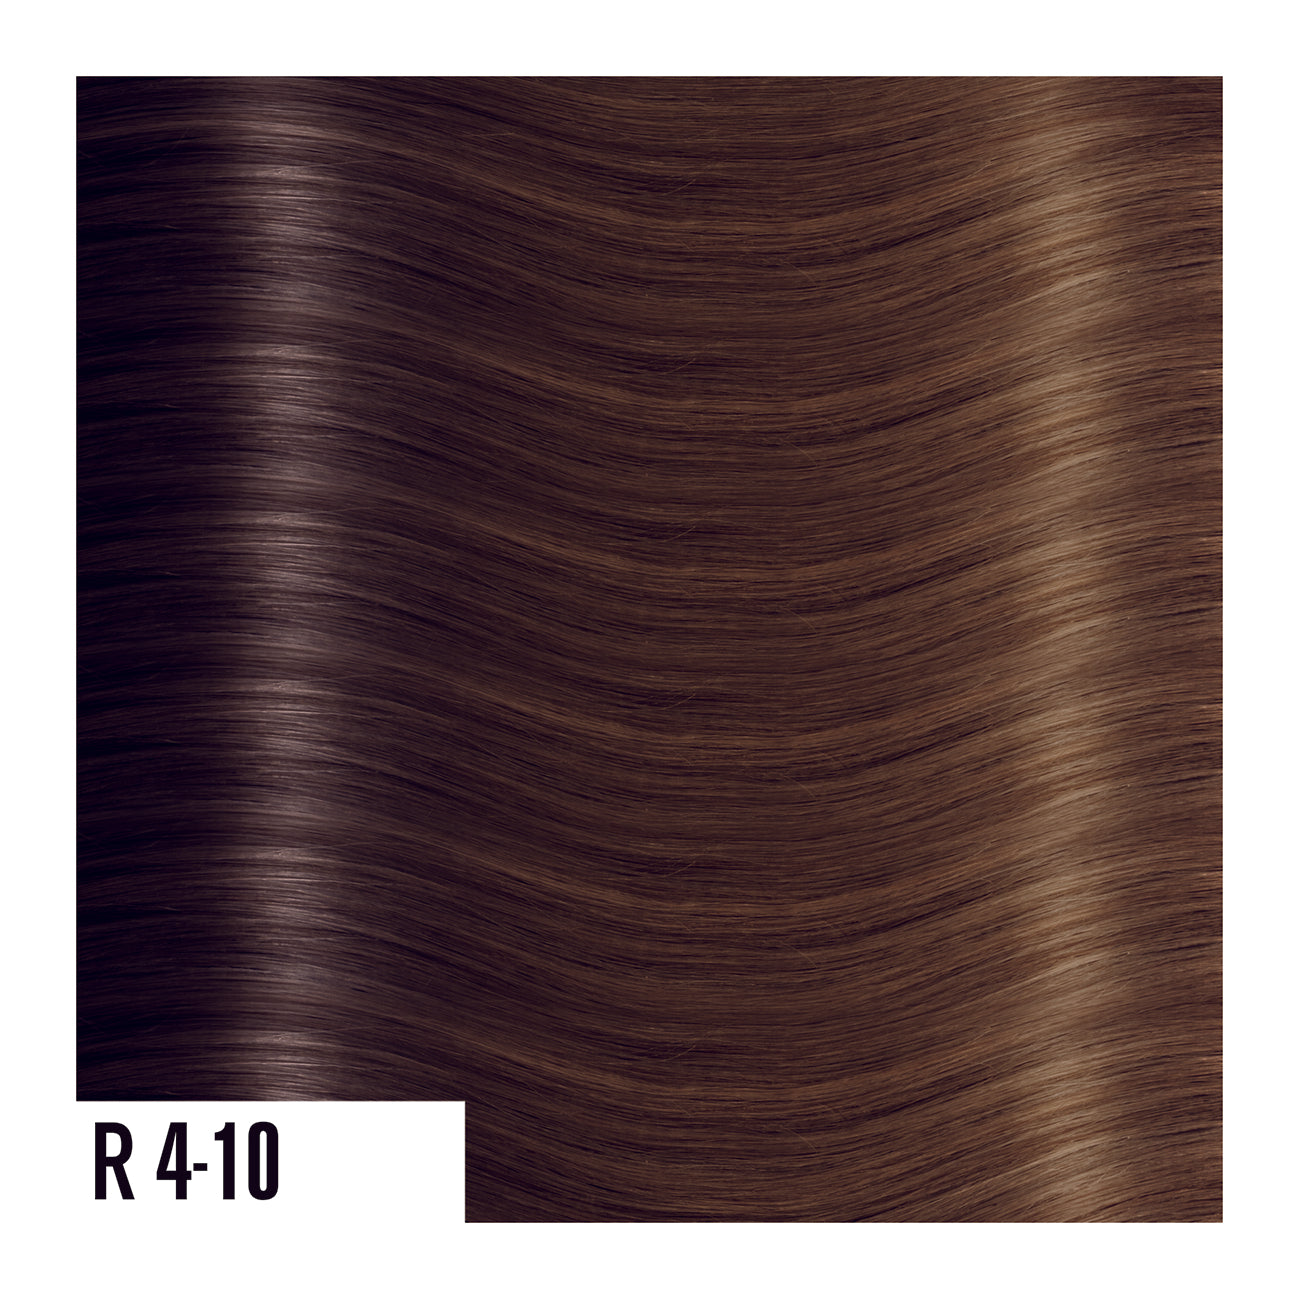 R4-40 - Rooted Prime Tape In Medium Brown Fade Into light brown - Ombre colors are a beautiful gradual blend of 3 colors with darker roots and lighter ends. 